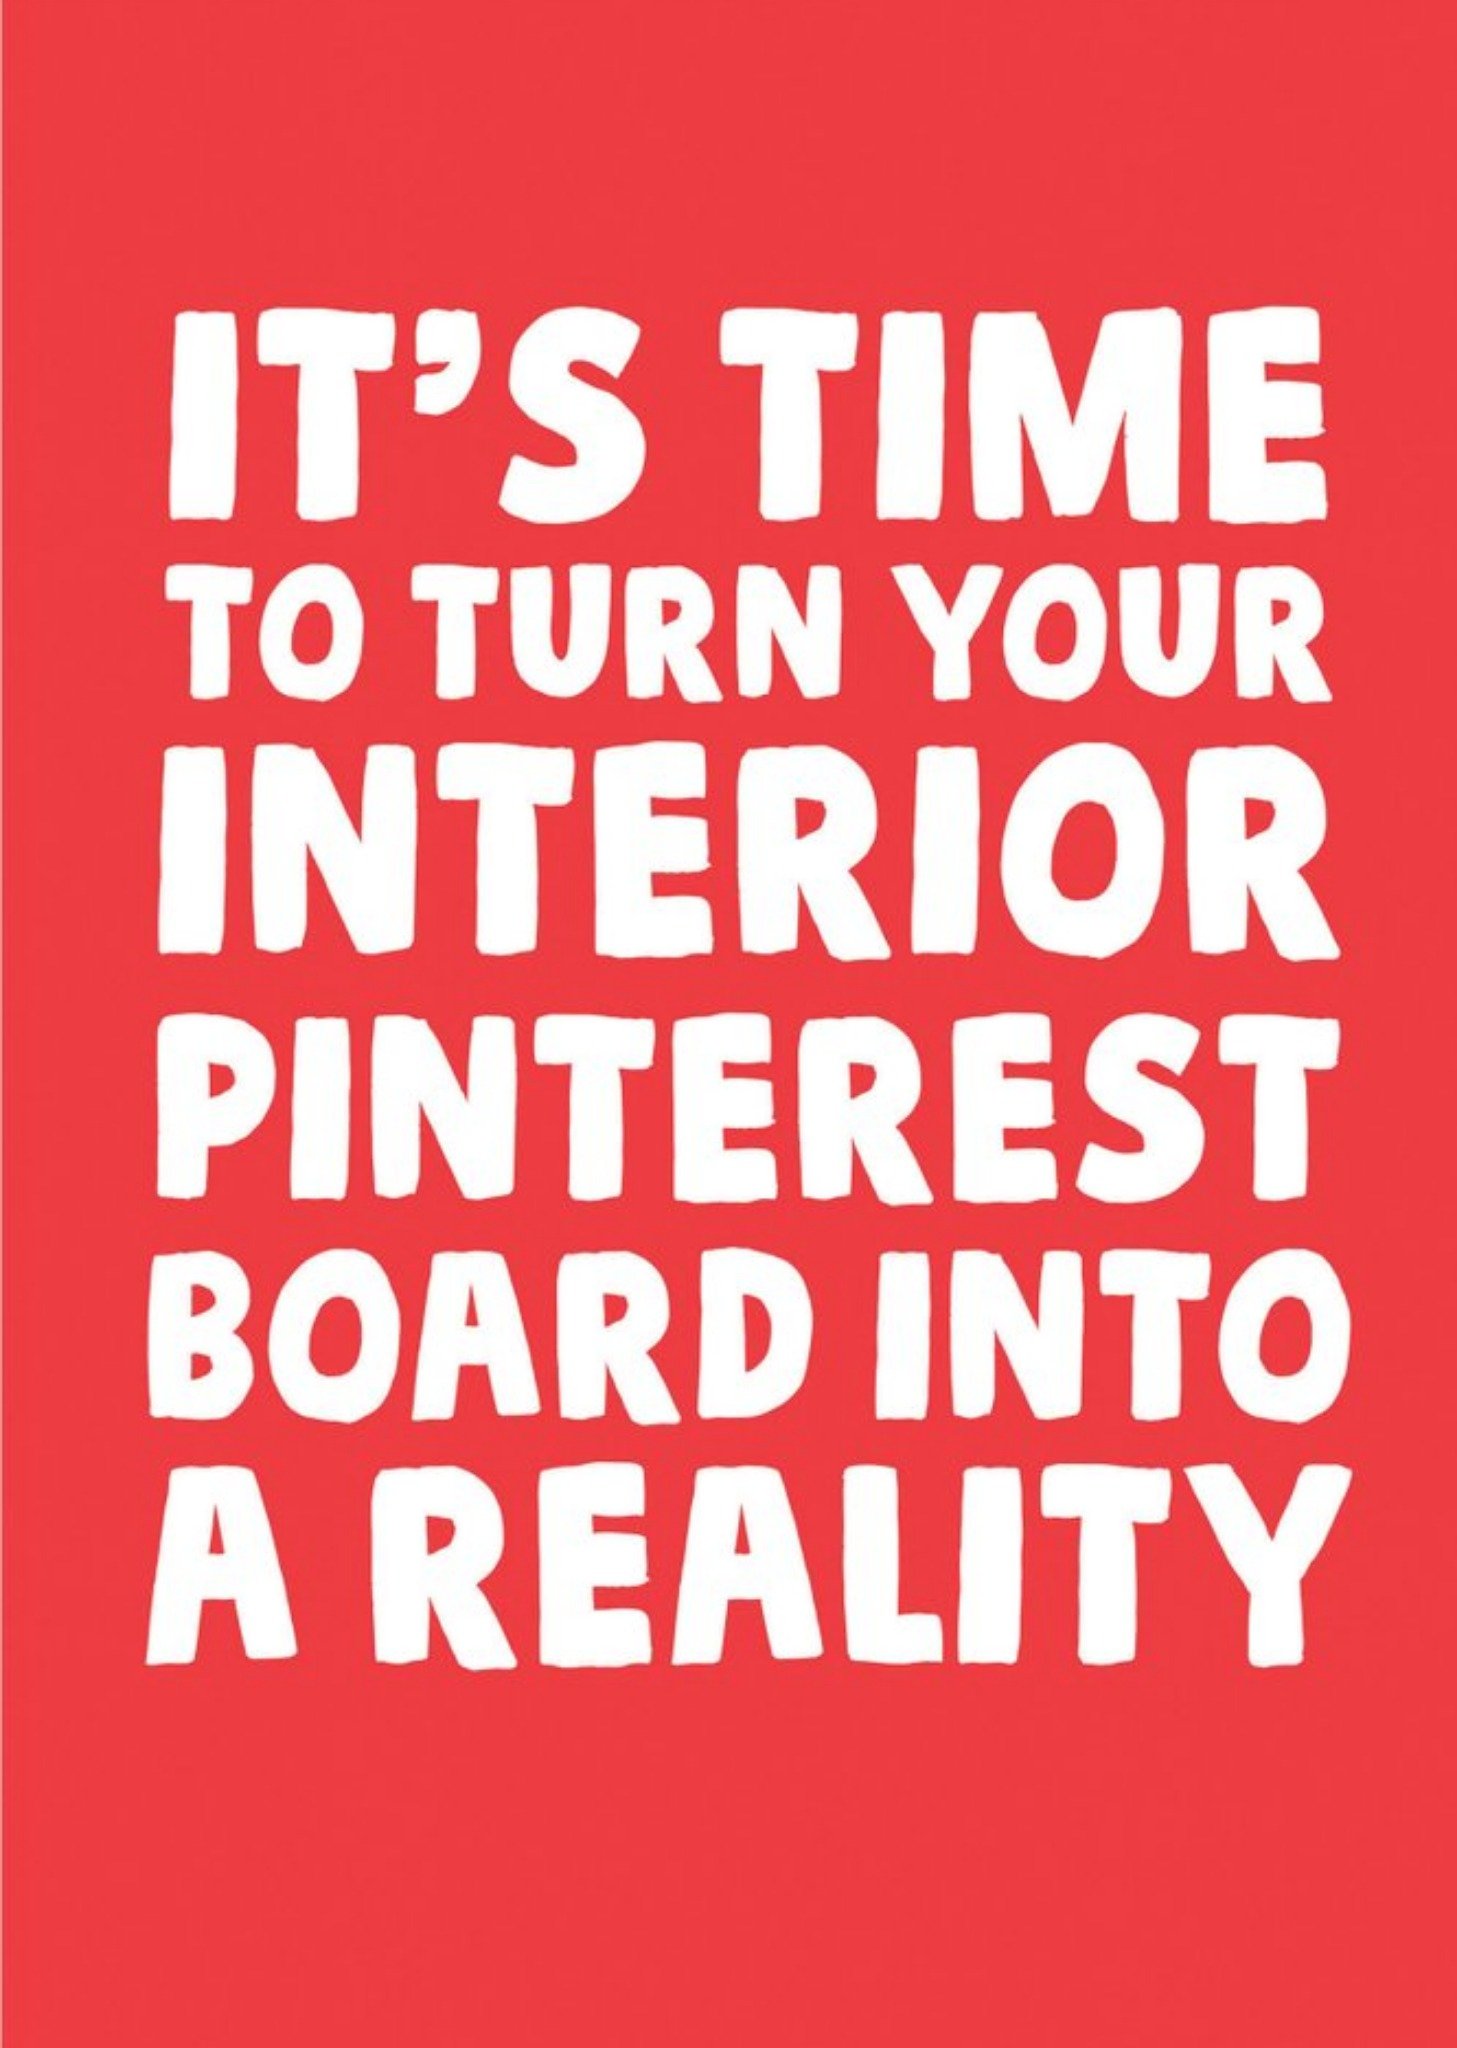 Other Funny Time To Turn Your Interior Pinterest Board Into A Reality New Home Card, Large